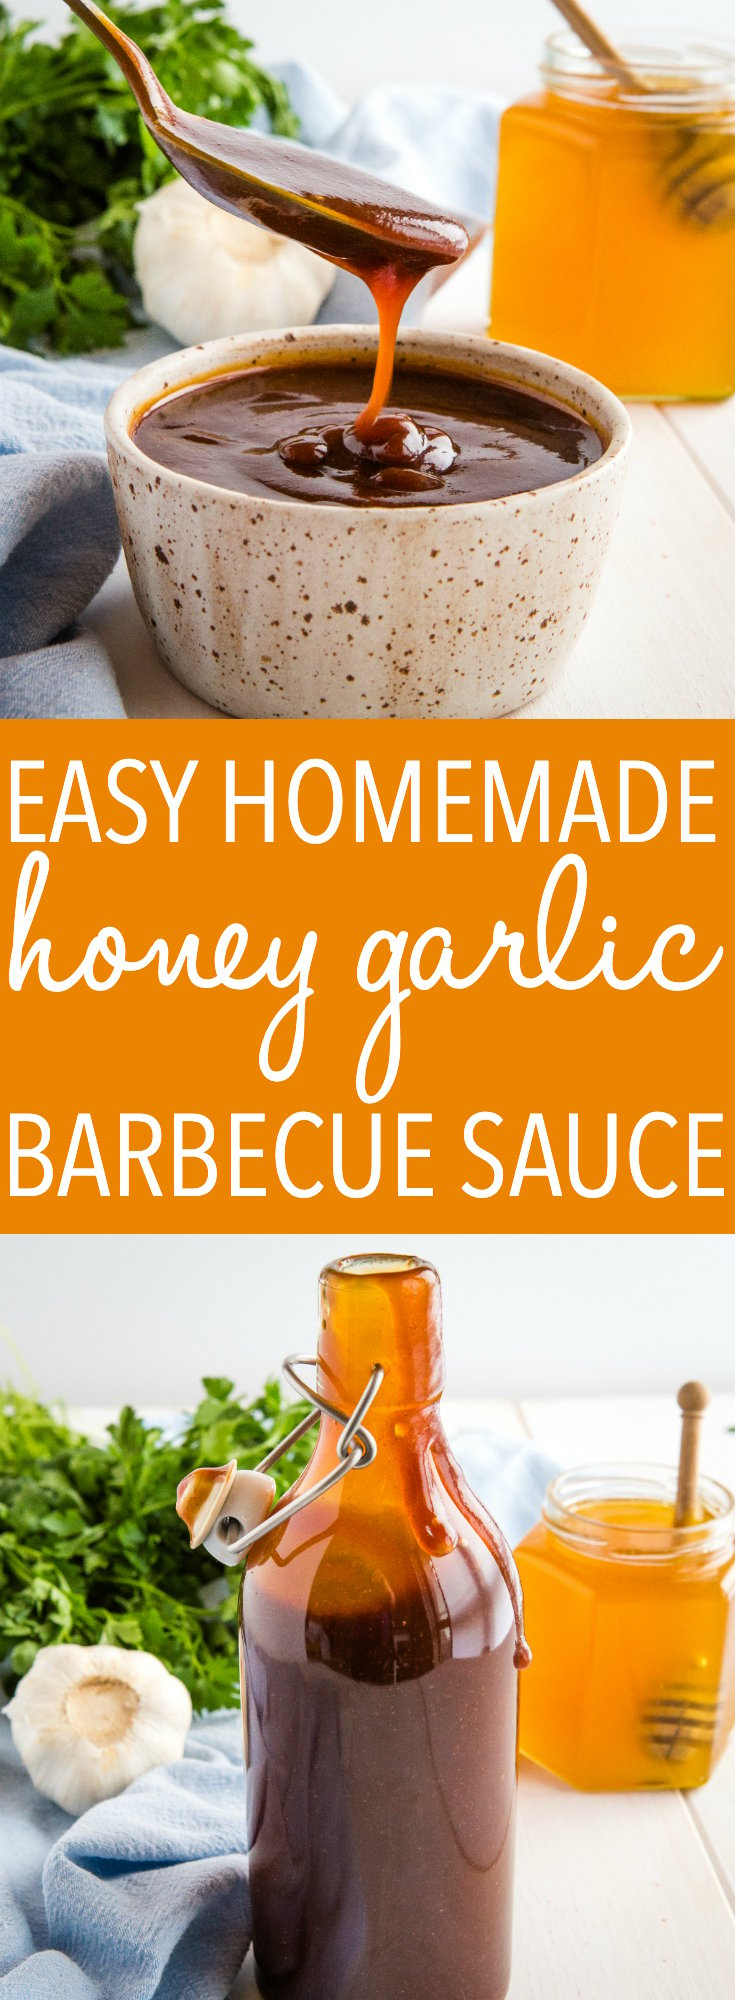 This Homemade Honey Garlic Barbecue Sauce is perfect on grilled meats, burgers, ribs and more! It's easy to make in one pot and it's packed with sweet and savoury flavour! Recipe from thebusybaker.ca! #honey #garlic #barbecue #sauce #homemade #bbq #barbecuesauce #ribs #burgers #summer via @busybakerblog